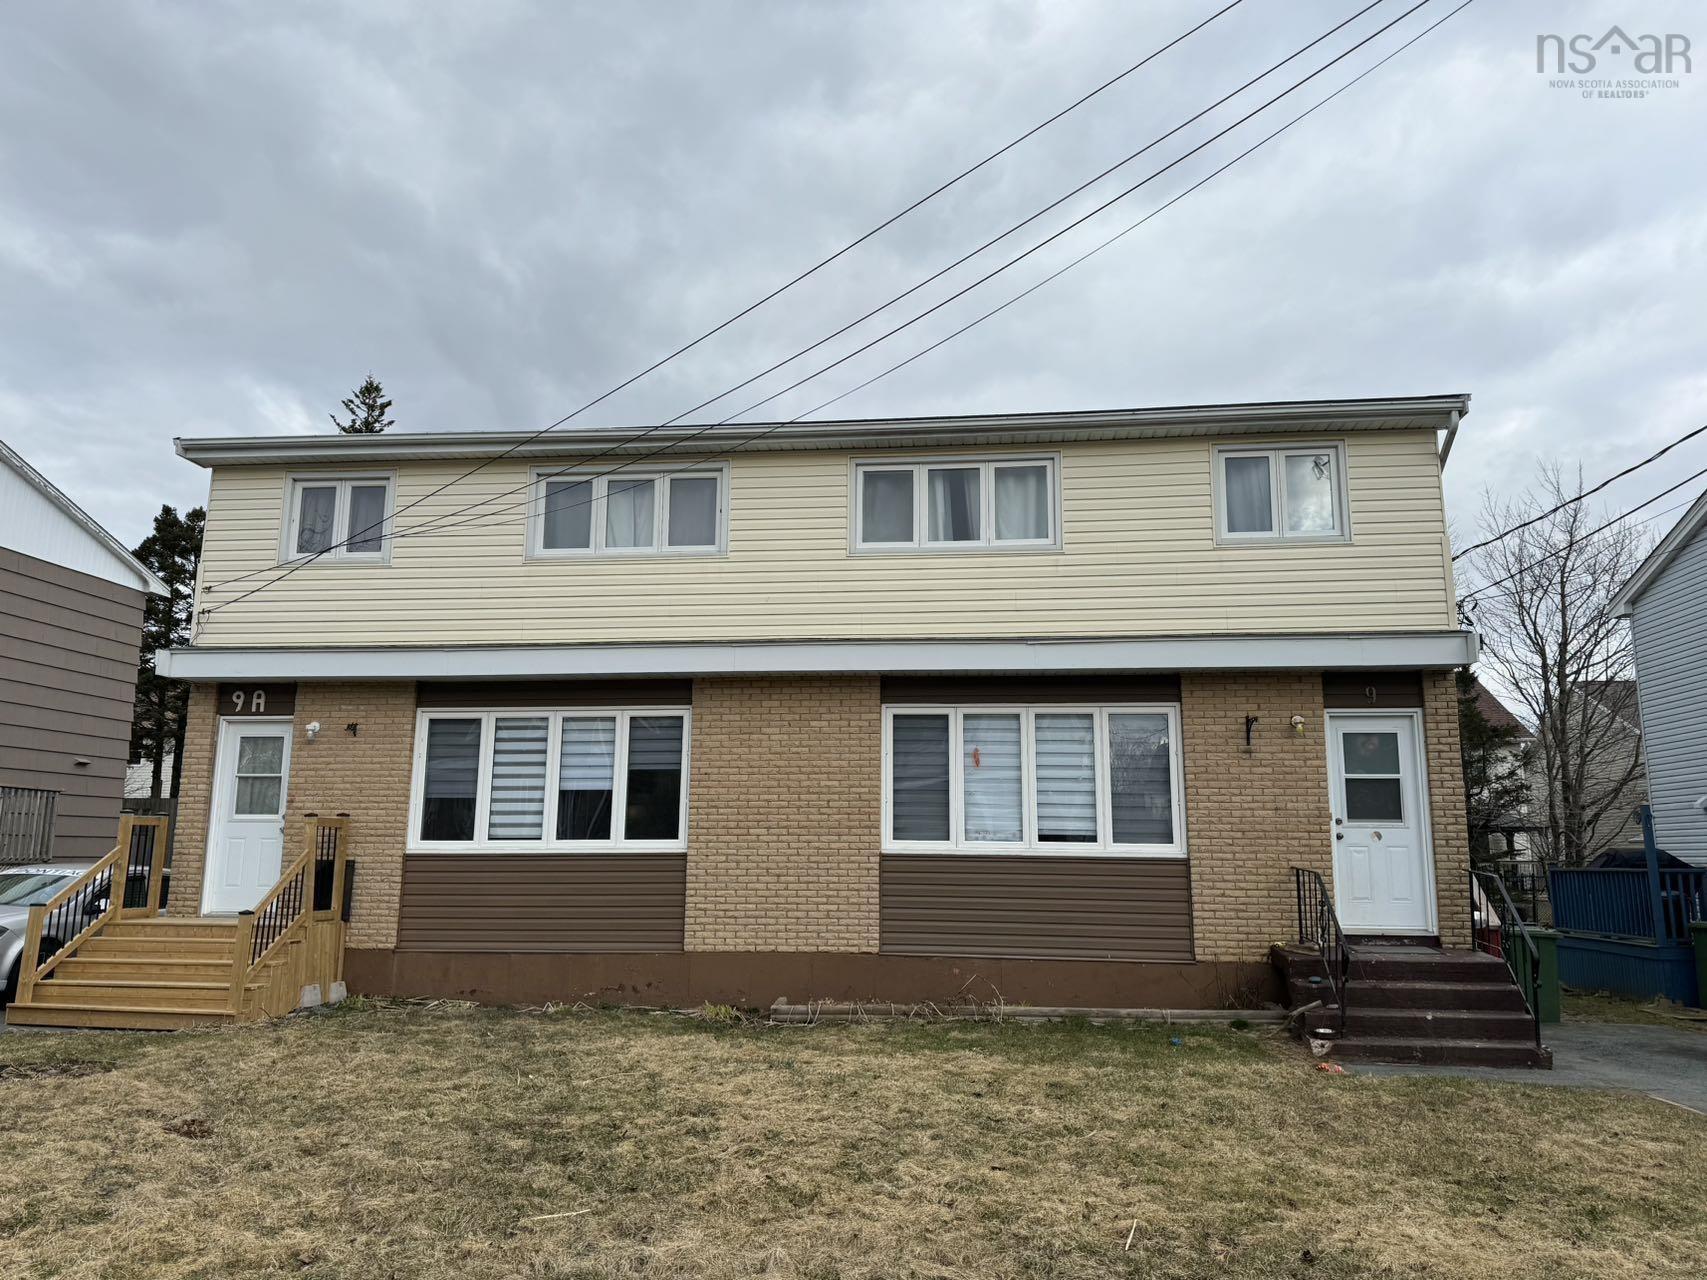 9/9A Marilyn Drive, Dartmouth NS - MLS<sup>®</sup>: # 202405383